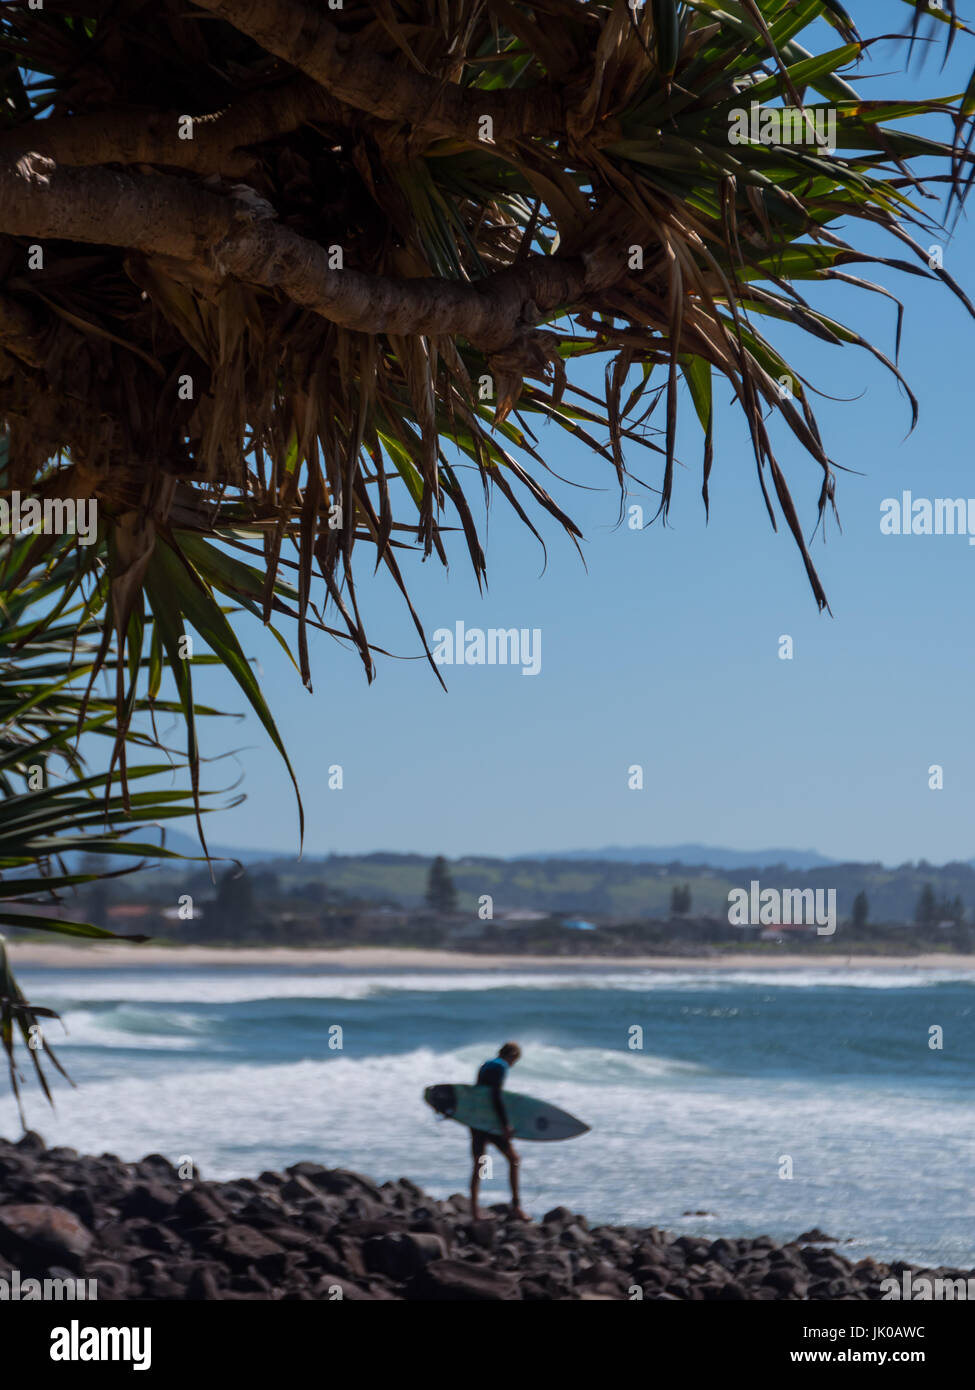 One Male Surfer walking on the Rocky Shoreline at Lennox Head to catch a Wave on the Point Surf Break Stock Photo